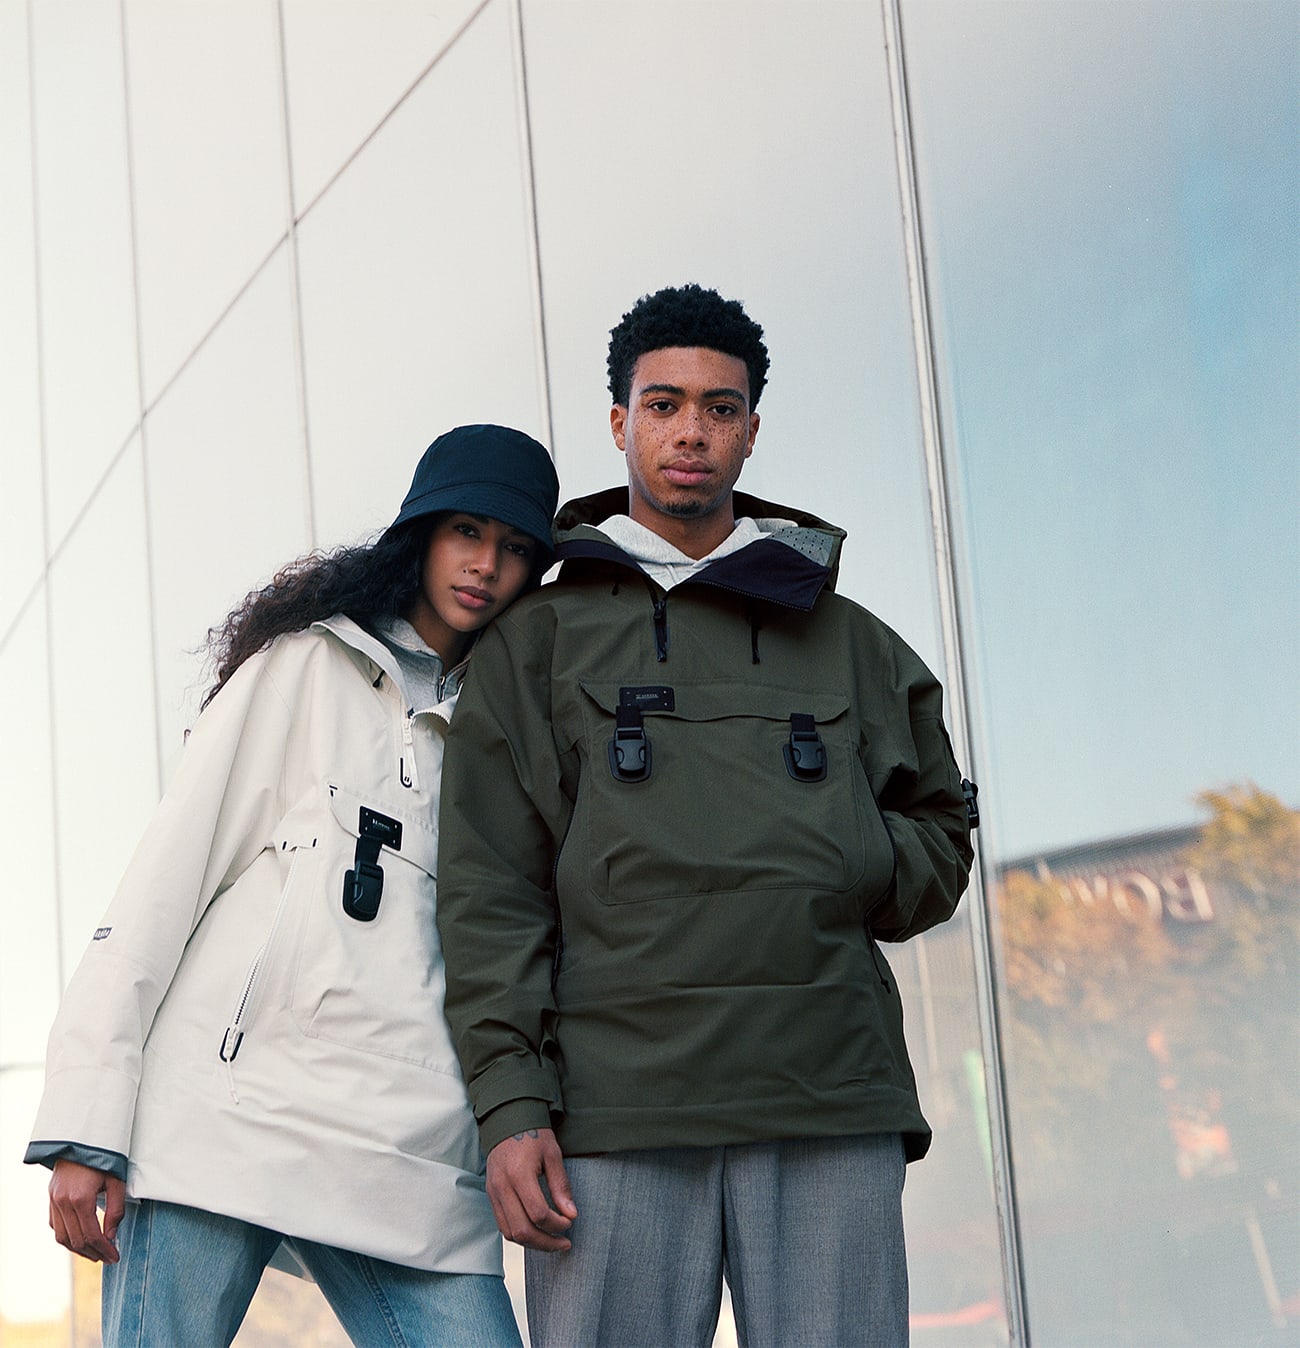 Models Julia Biango and Leron Nurse wearing Armada ski outerwear jackets, her jacket is white his jacket is army green. She is wearing a black bucket hat. They are standing in front of an industrial Manhattan building it is a sunny day, blue sky. The male model has a lot of freckles. Look-book photographed by New York photographer Maria Bruun. The image was taken using the Hasselblad 500CM camera and Kodak Portra film.